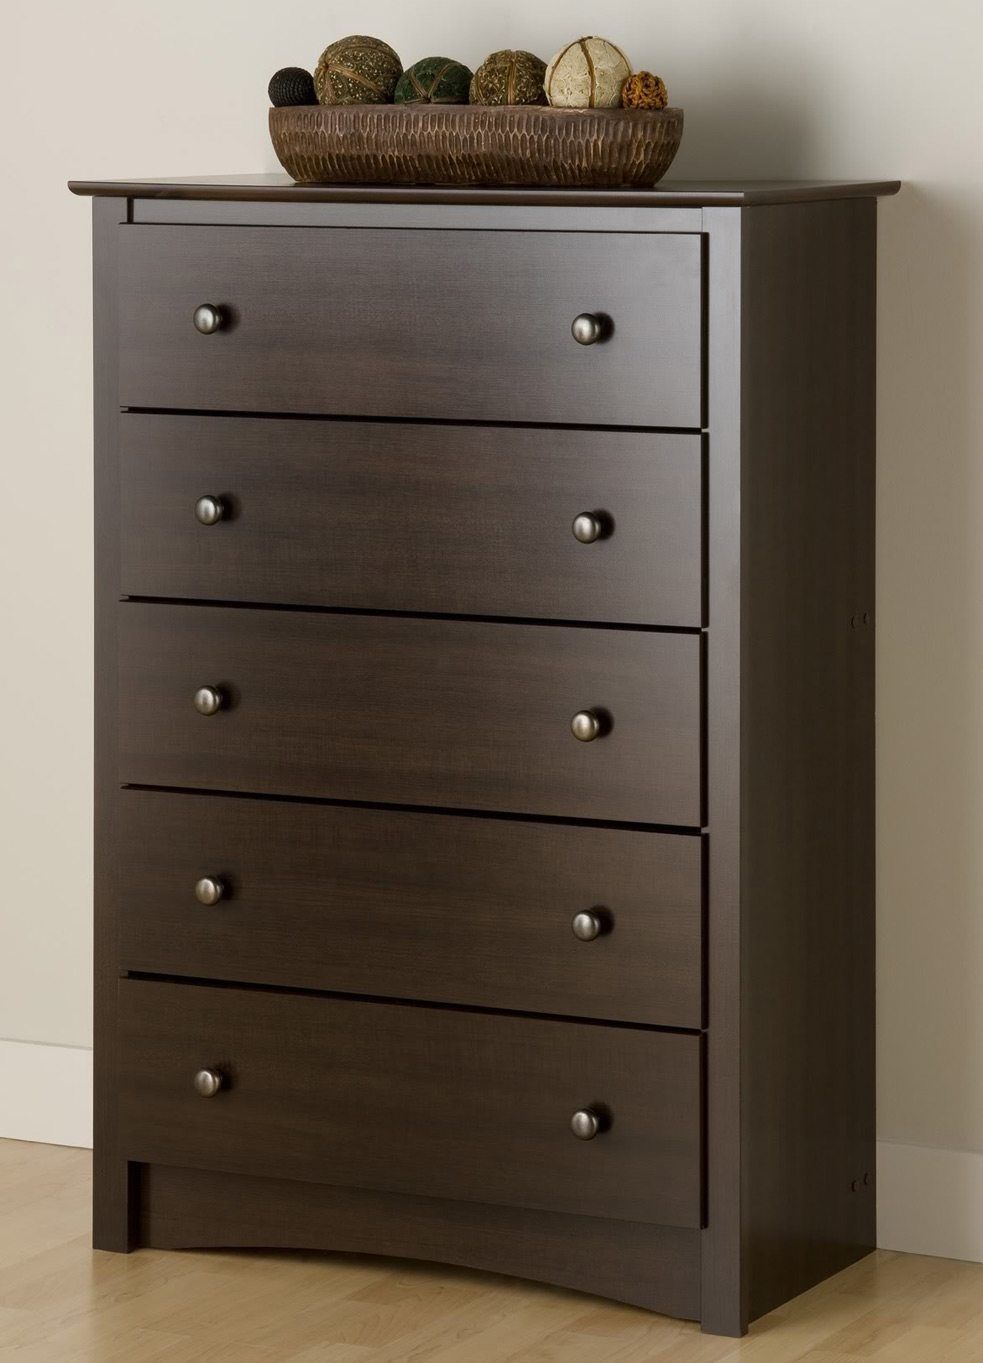 A large tall brown dresser is necessary and comfortable piece of furniture.